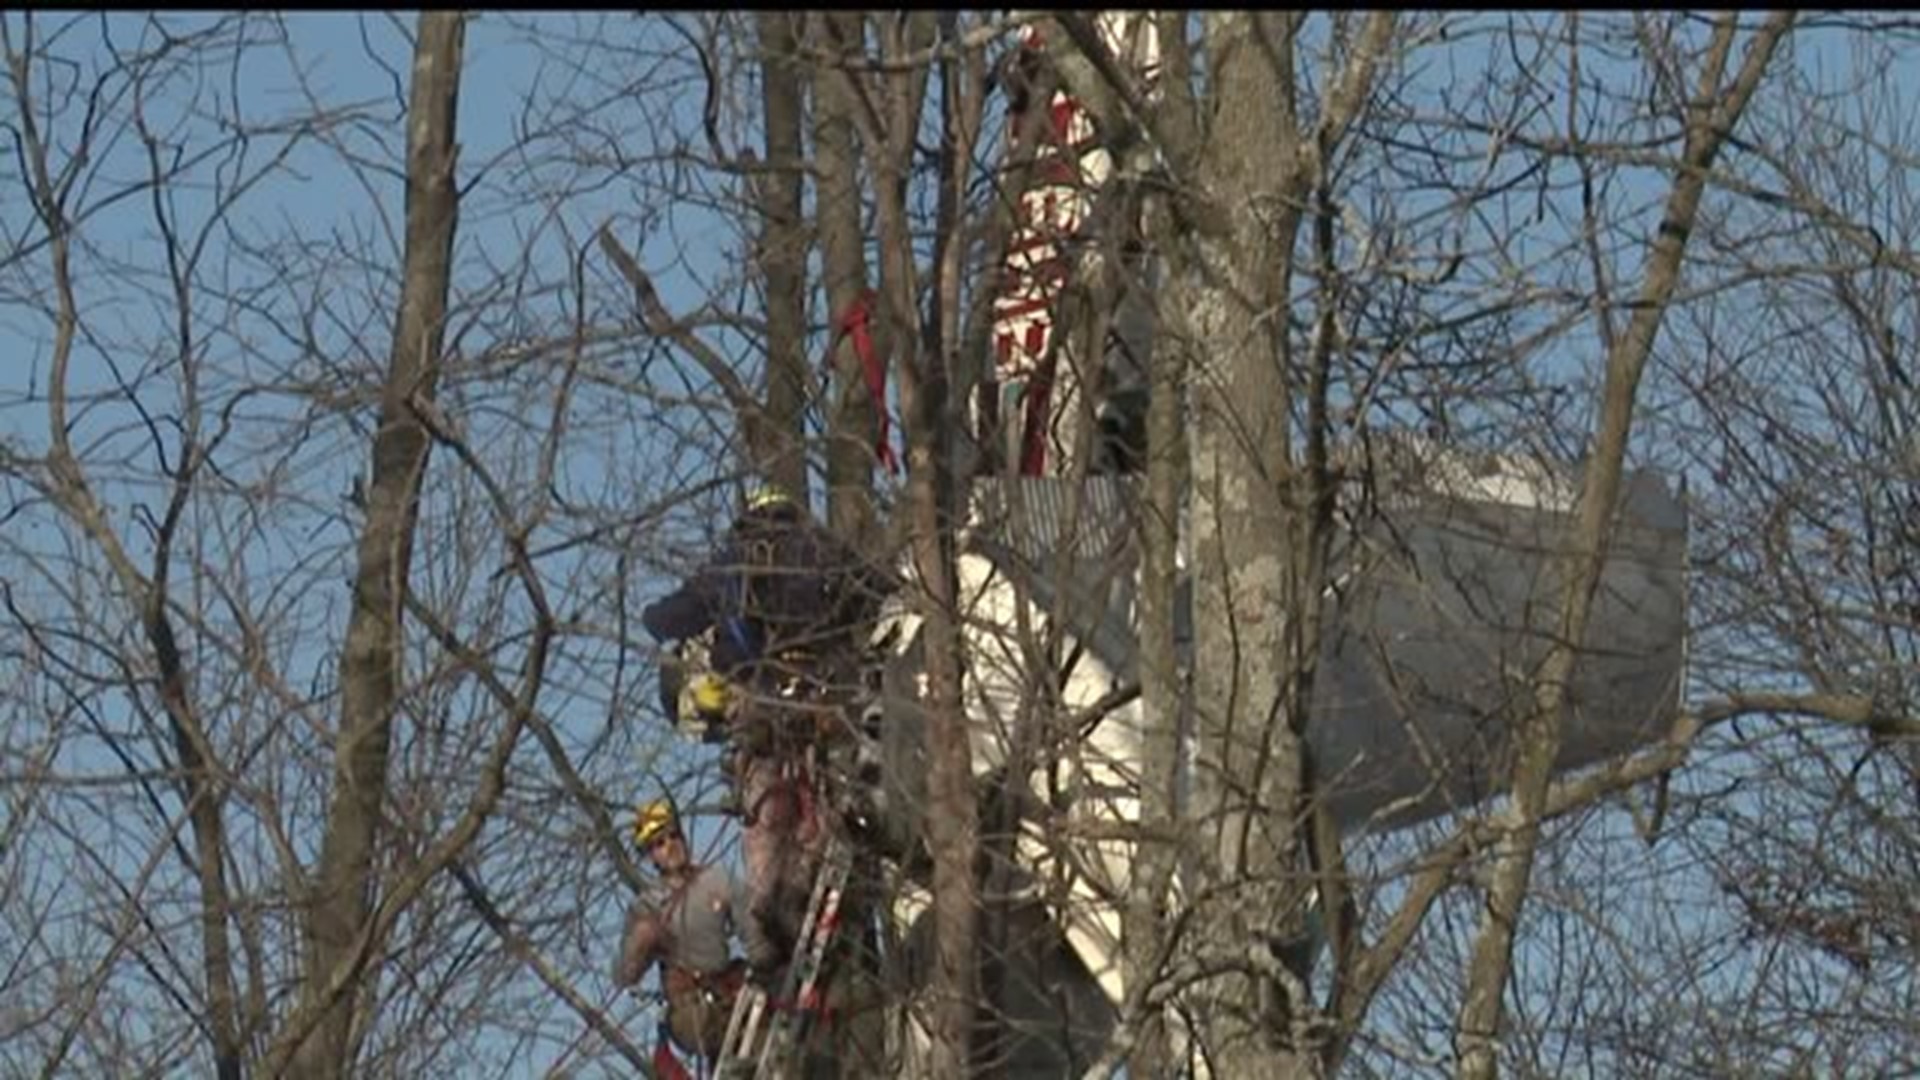 Pilot not hurt after crashing plane into trees in Adams County